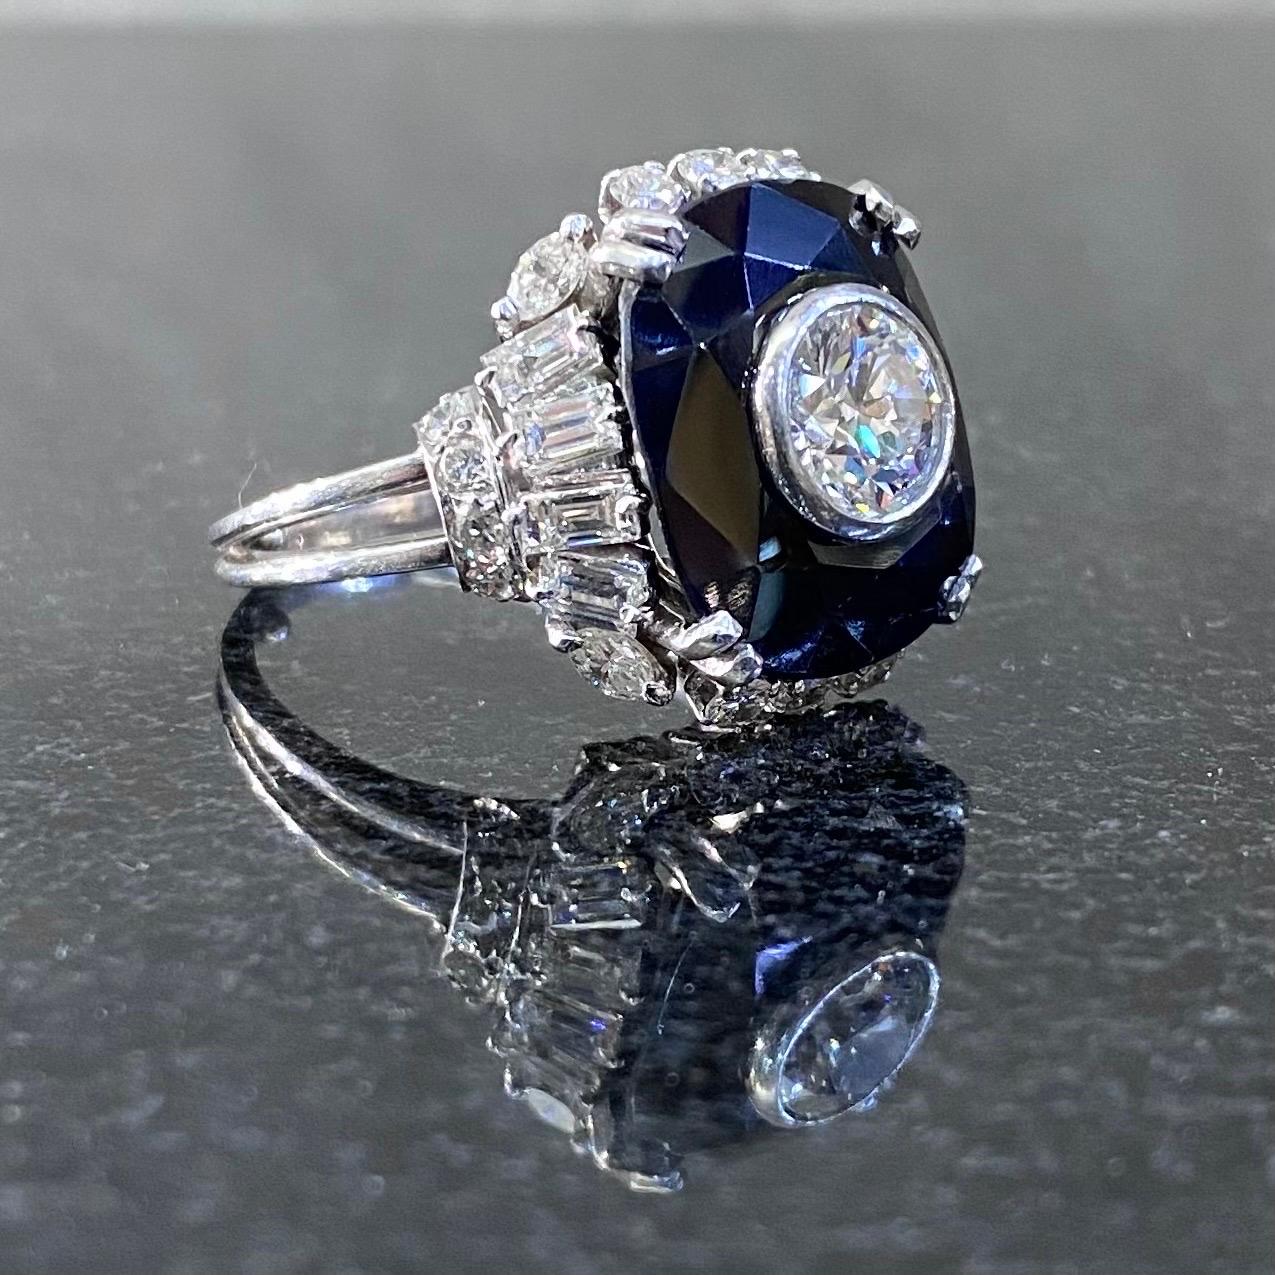 Mid-Century diamond and dark blue sapphire cocktail ring in platinum, Europe, 1950s/1960s. This ring features an elongated cushion-shape dark blue sapphire claw-set to the center and accented in the middle with a bezel-set round brilliant-cut